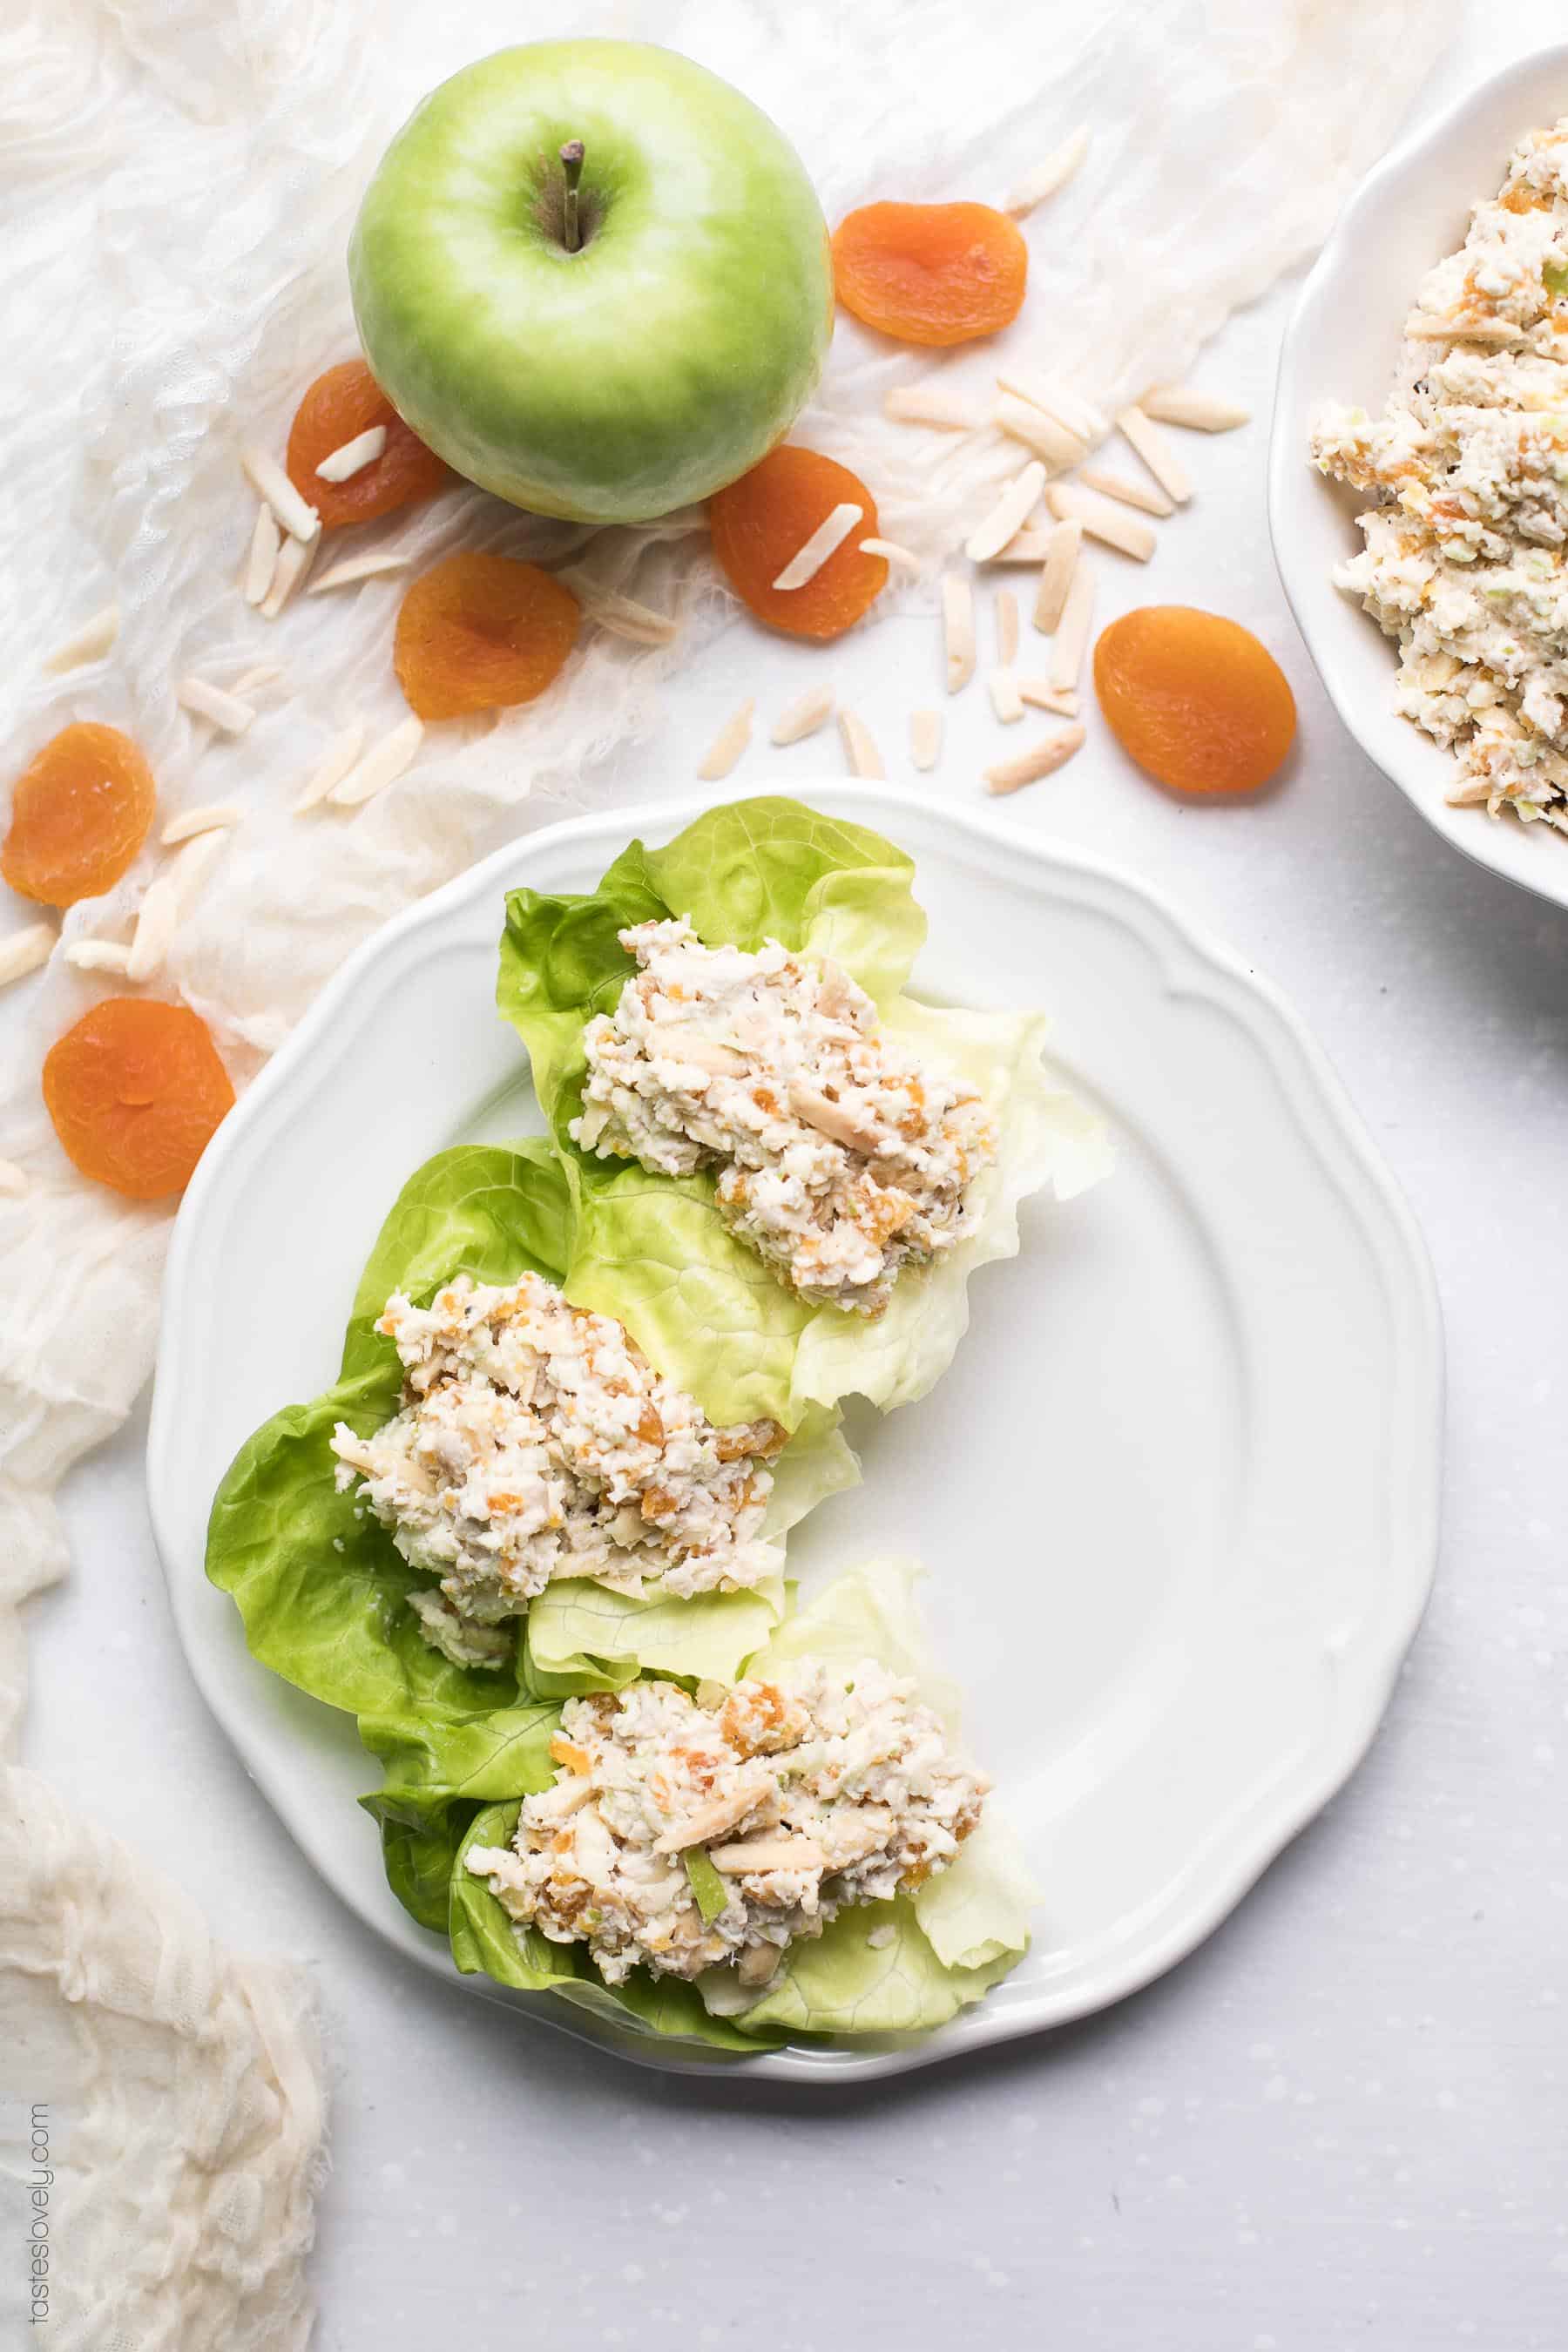 Paleo & Whole30 Apricot and Almond Chicken Salad Recipe - a light and flavorful chicken salad. My favorite meal prep lunch for the week! Gluten free, grain free, dairy free, sugar free, clean eating.